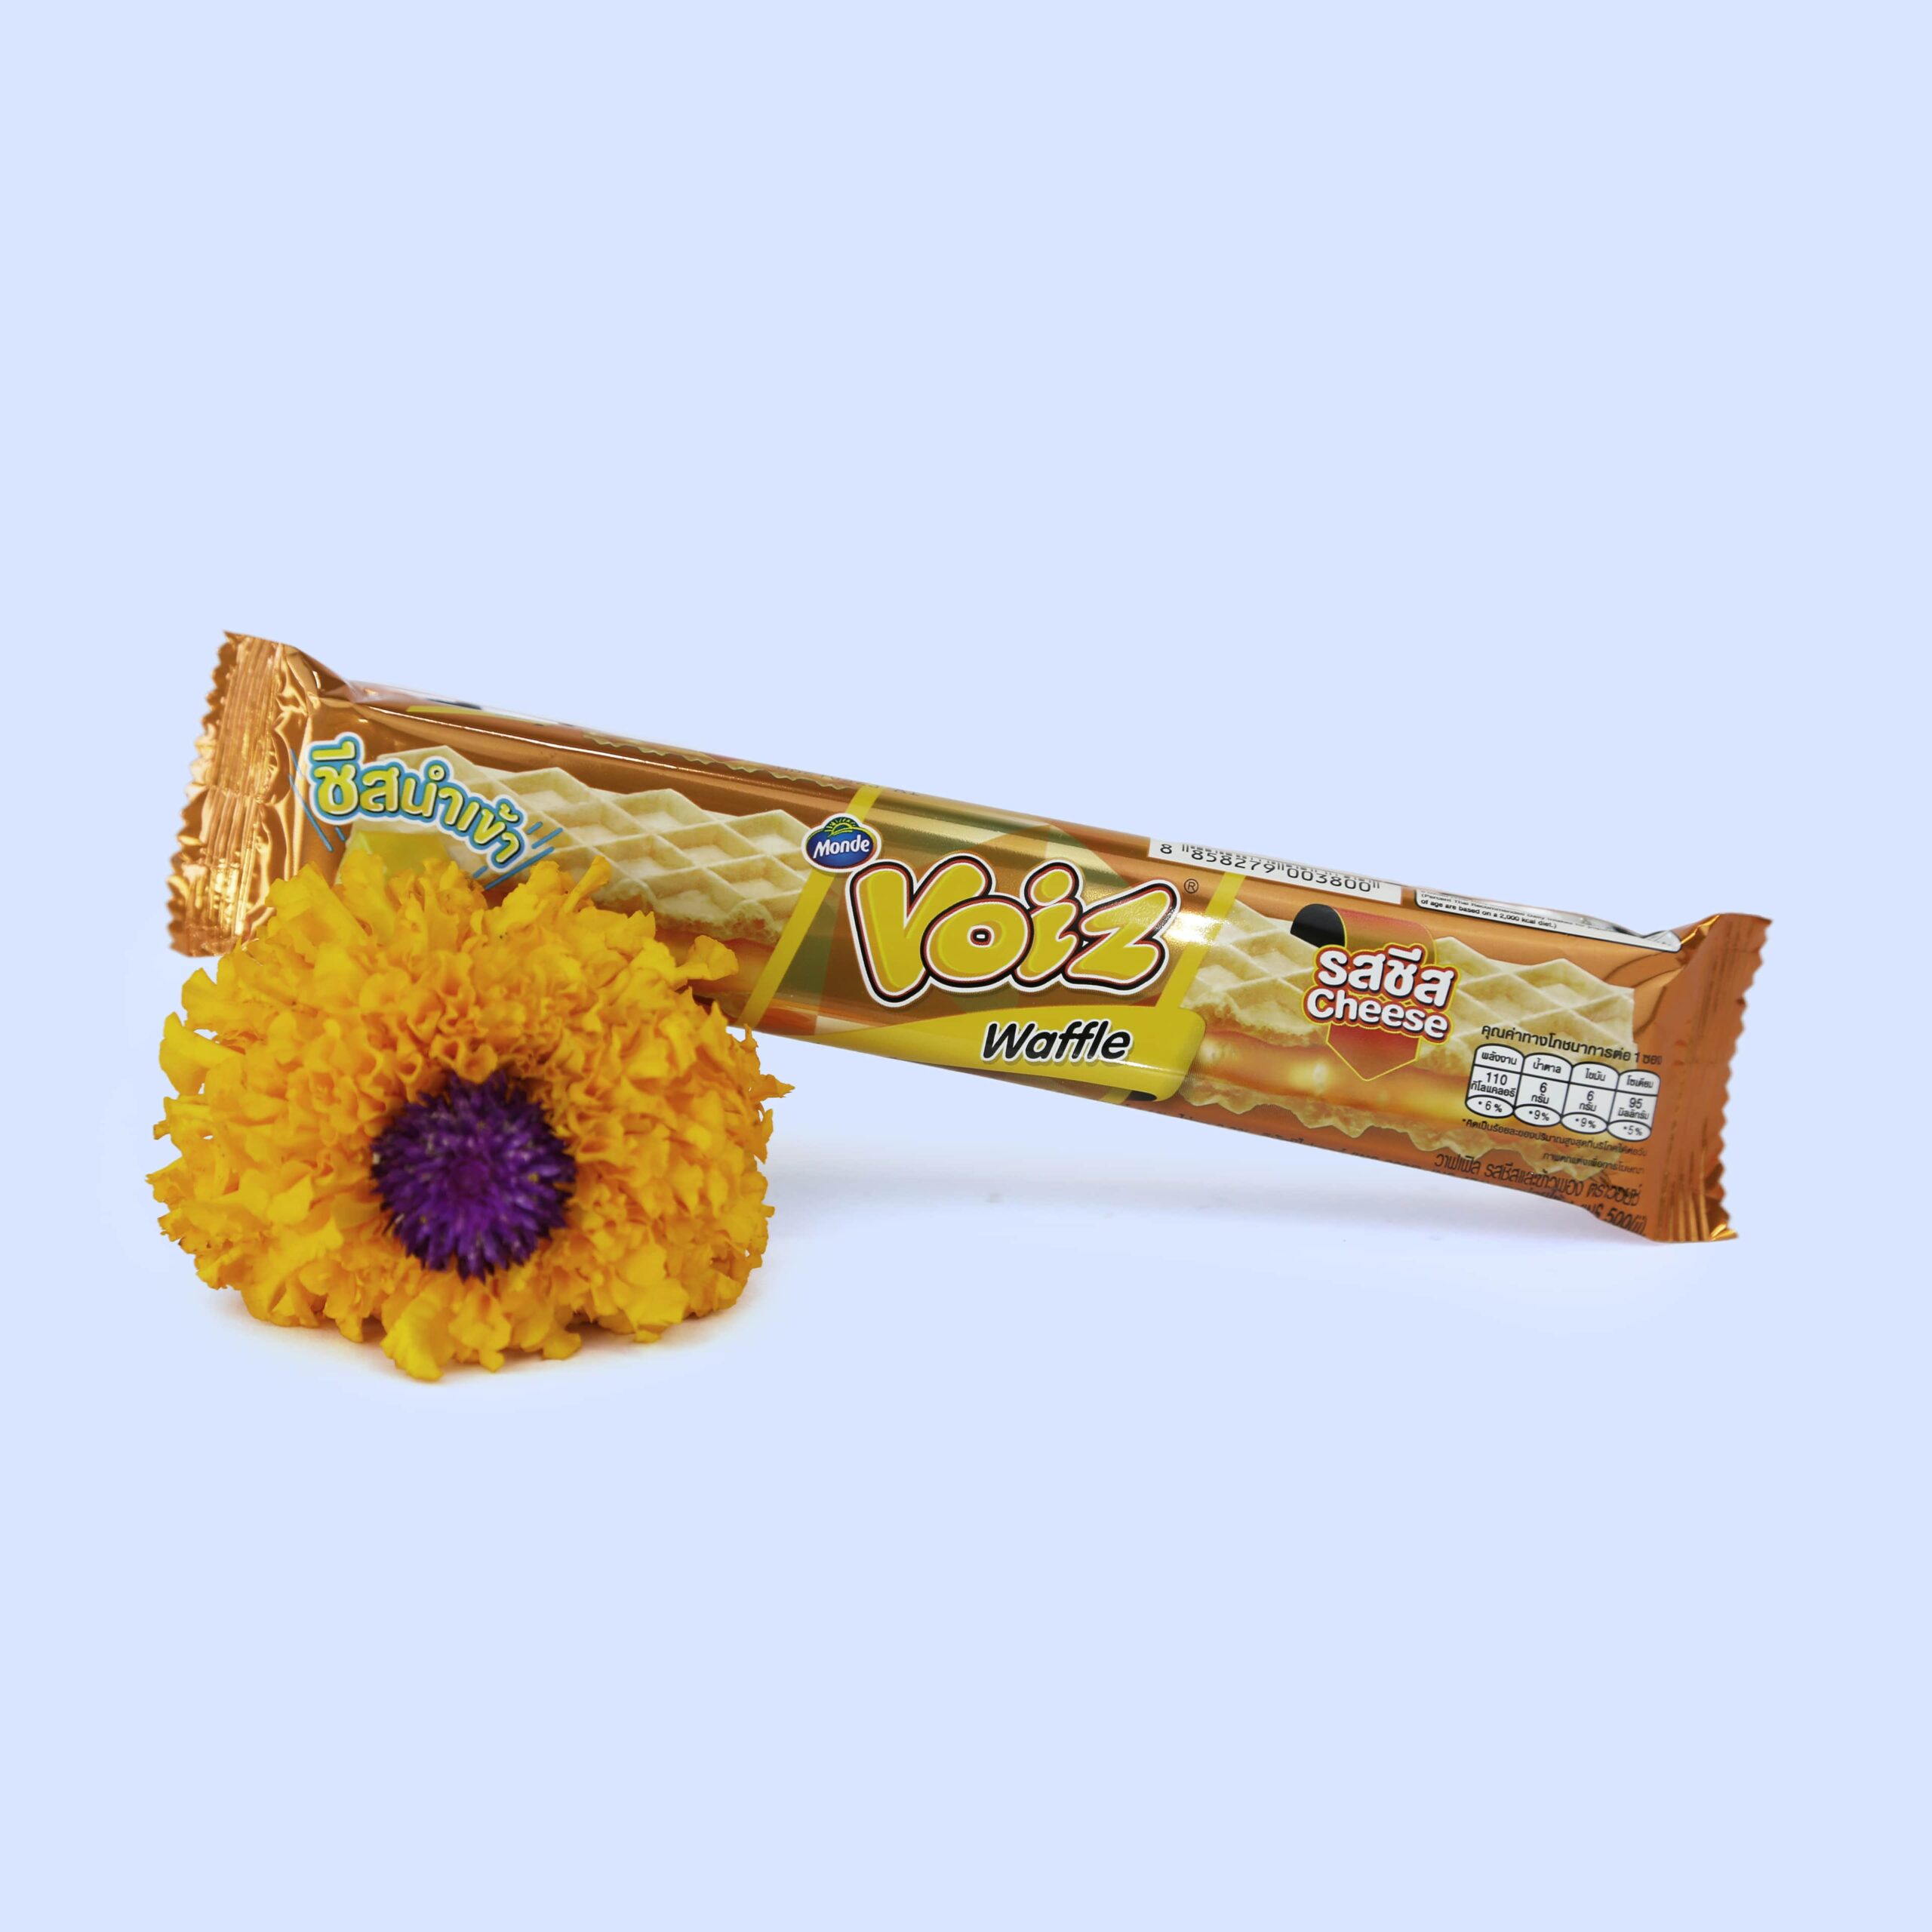 Voiz waffle with cheese filling. Snack from Thailand in Heap Brand Loy Krathong theme snack box